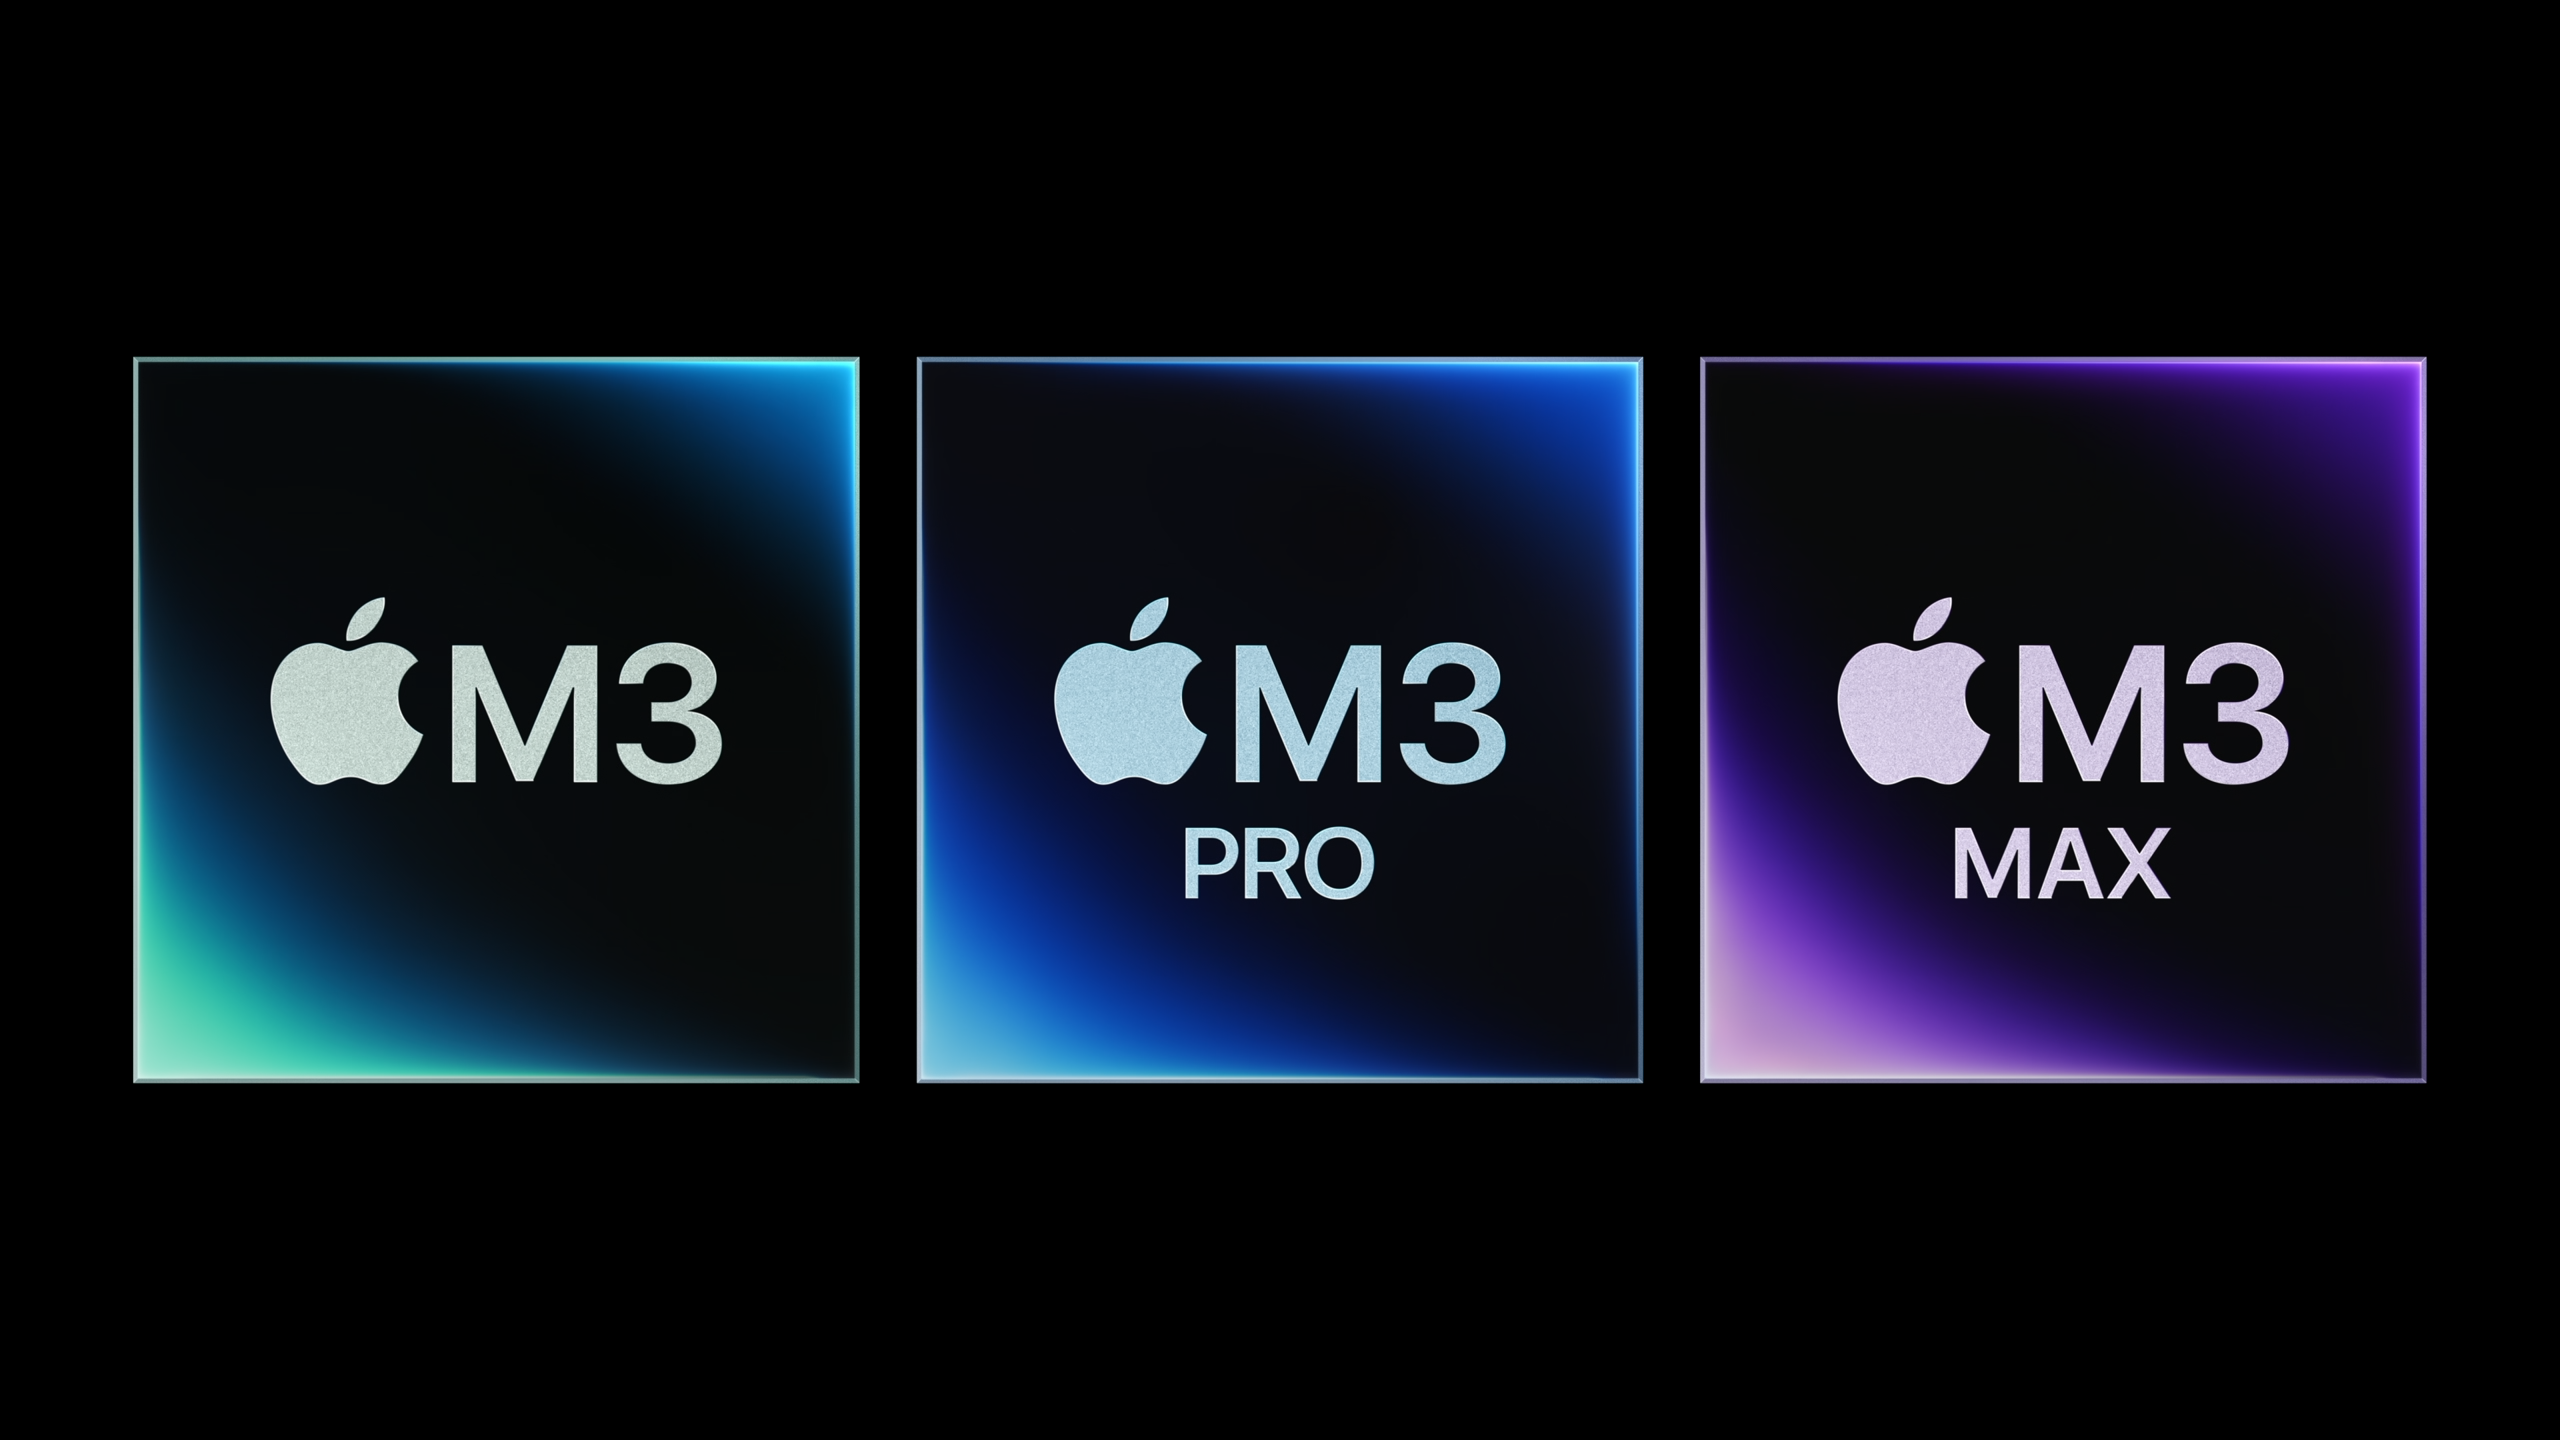 Apple Scary Fast October 30 event M3, M3 Pro, M3 Max chips 26